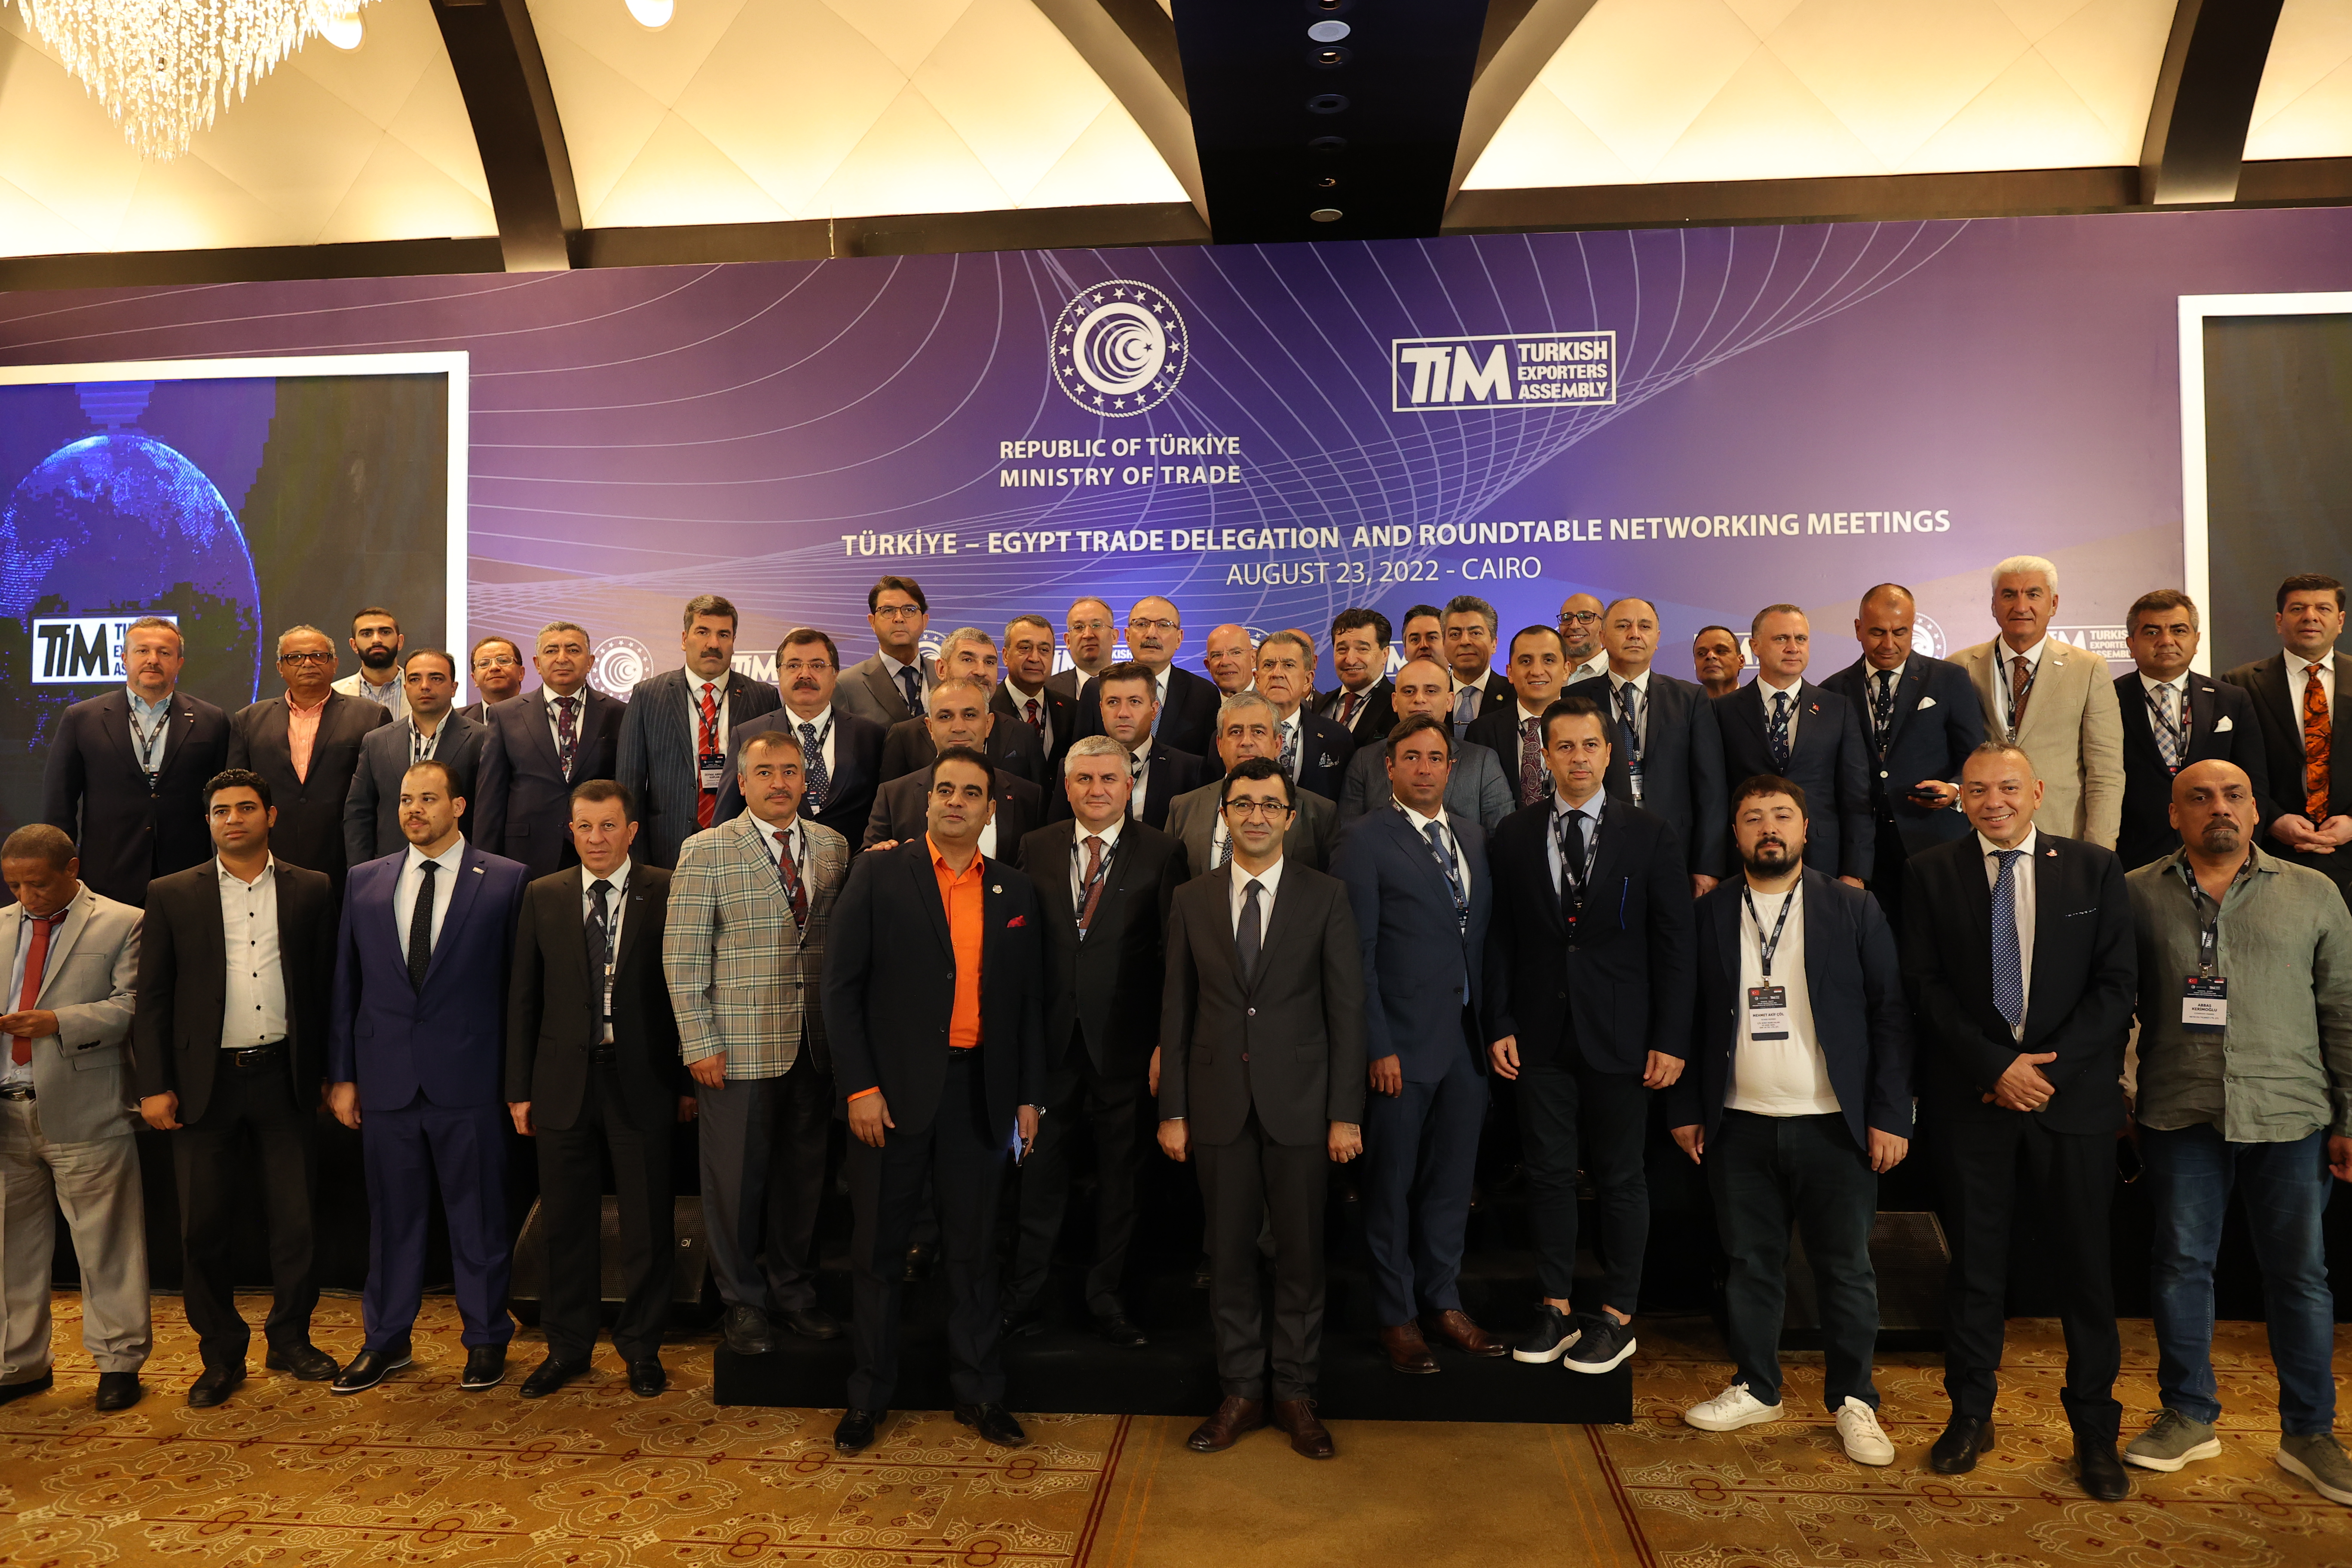 TİM Sectoral Trade Delegations Gained Momentum